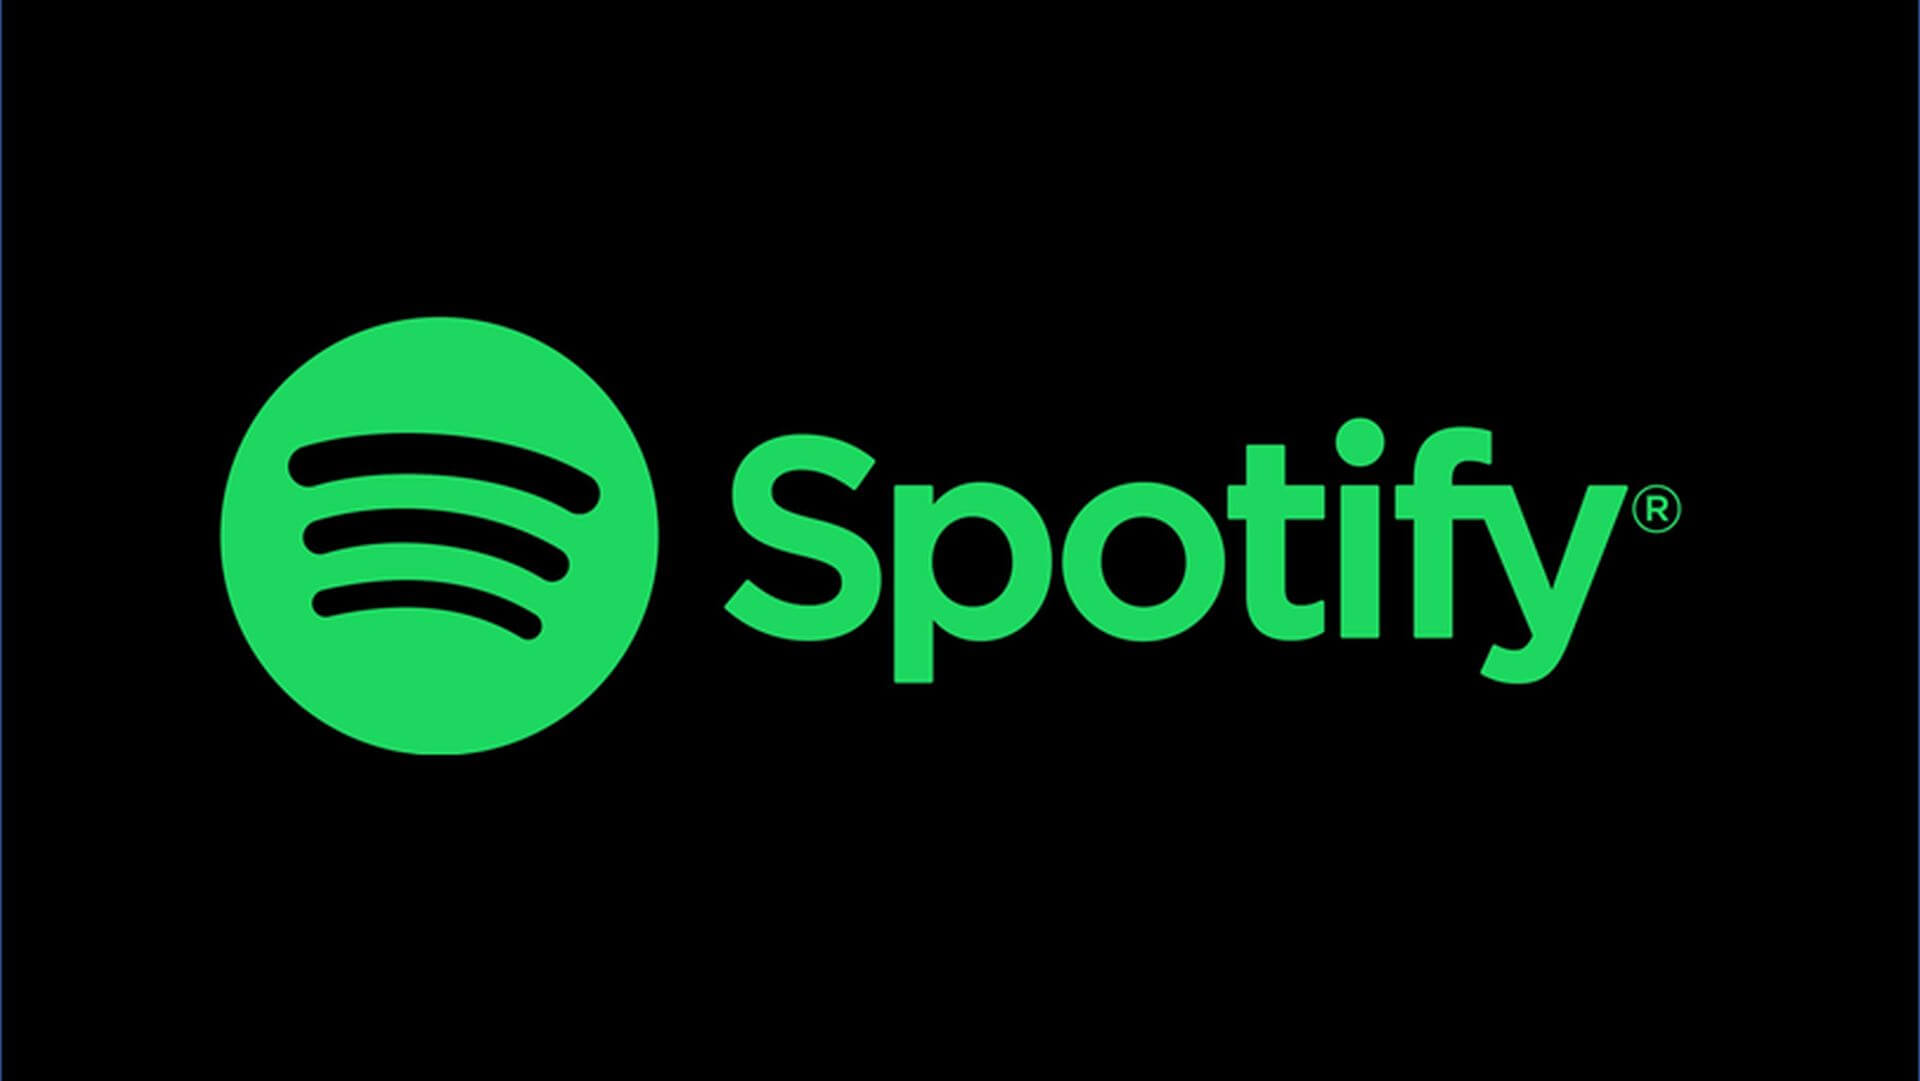 Spotify Reportedly in Talks to Test Full-Length Music Videos